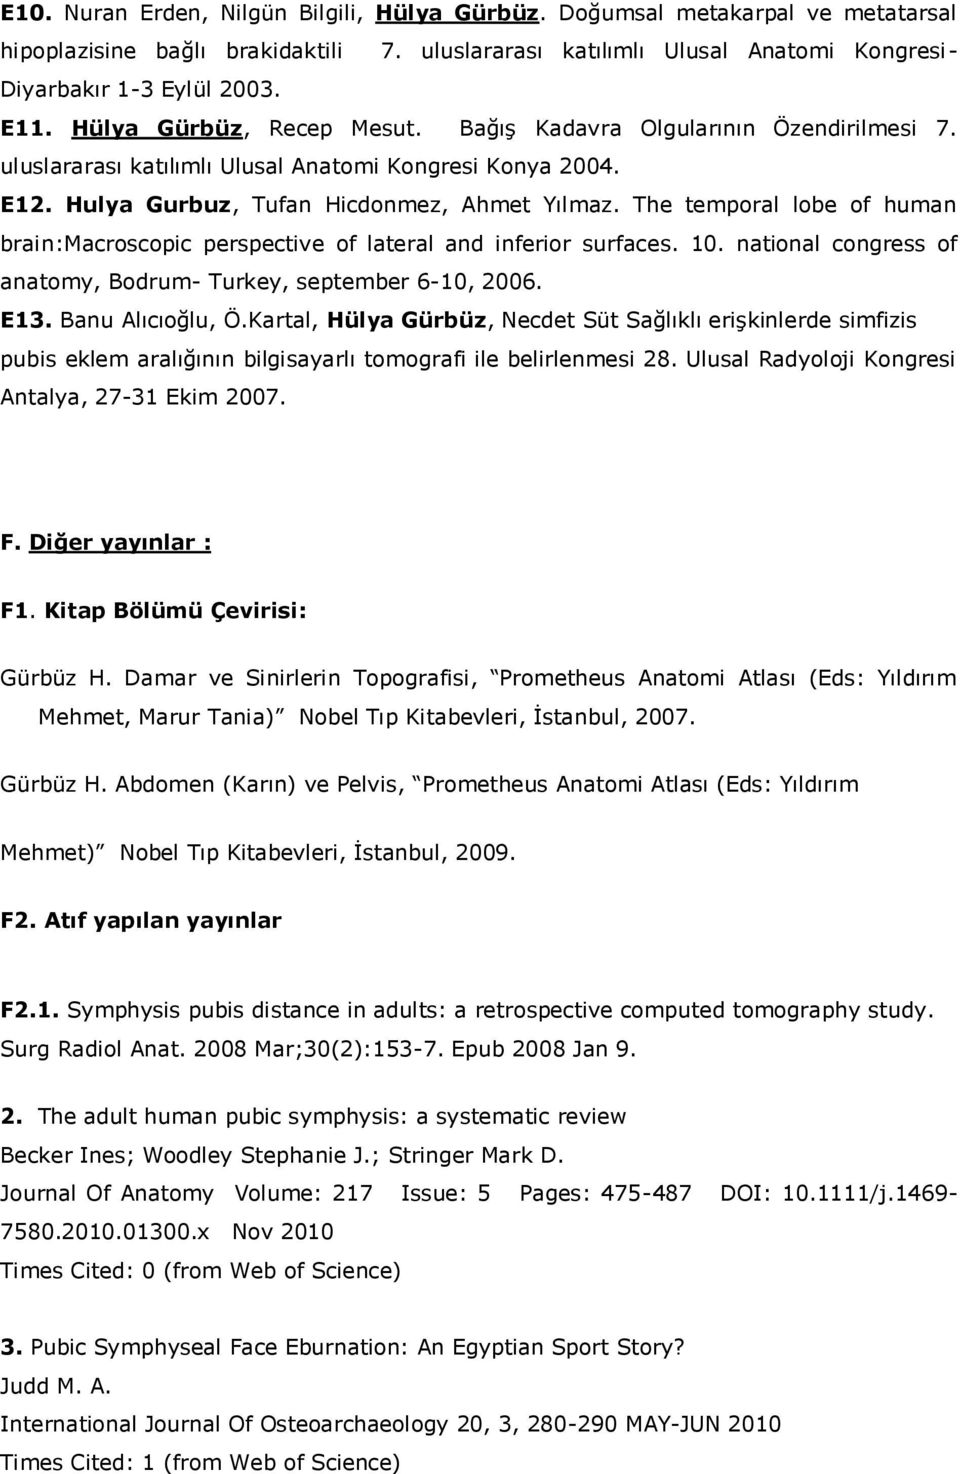 The temporal lobe of human brain:macroscopic perspective of lateral and inferior surfaces. 10. national congress of anatomy, Bodrum- Turkey, september 6-10, 2006. E13. Banu Alıcıoğlu, Ö.